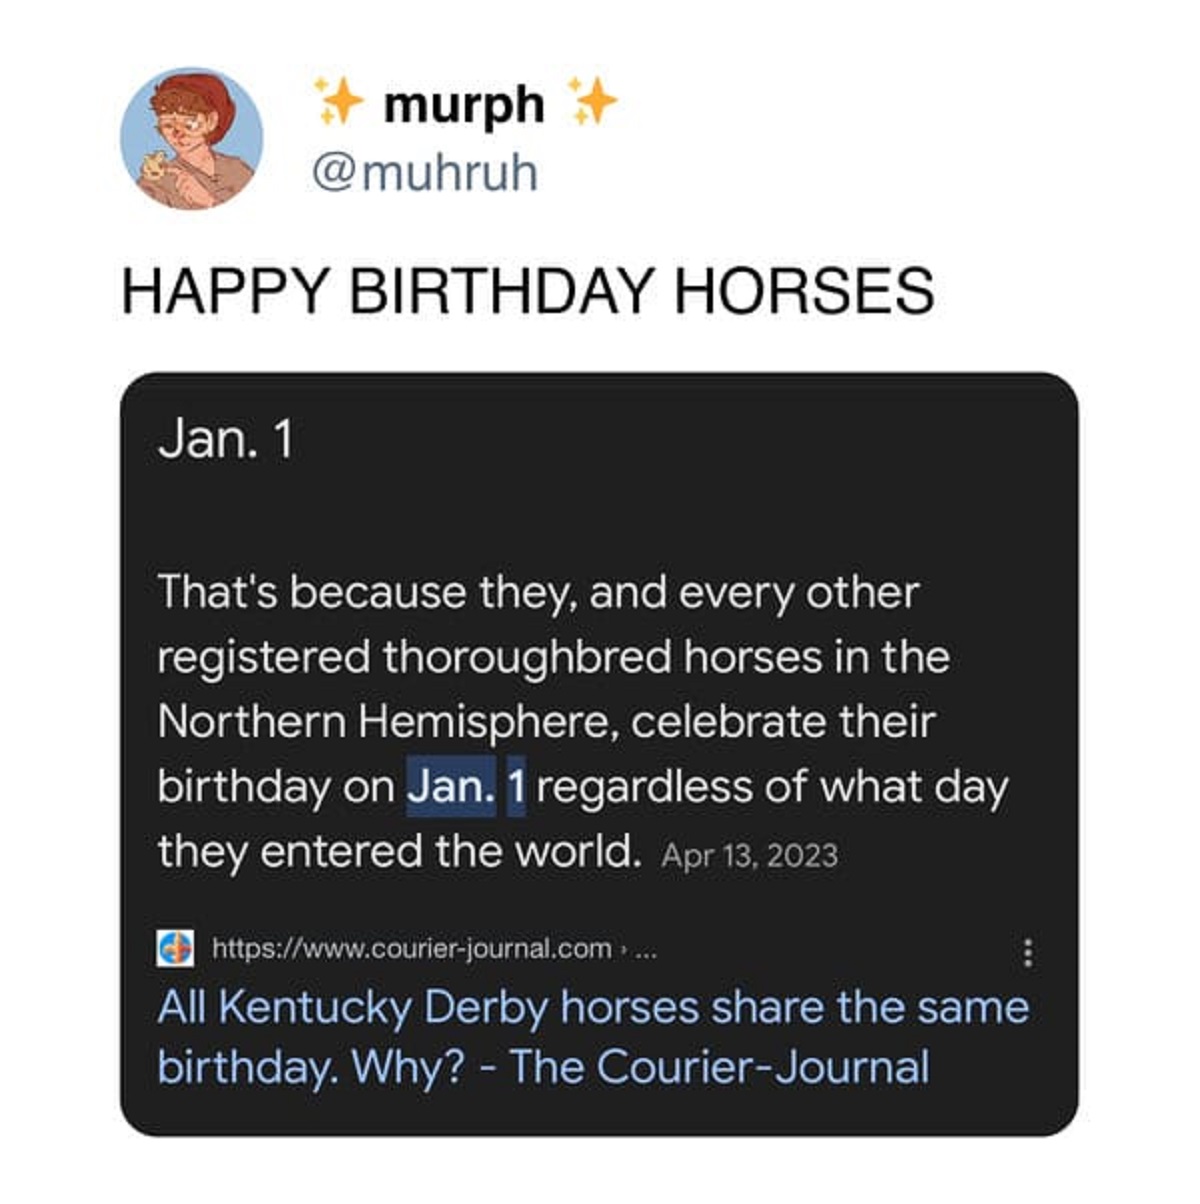 multimedia - murph Happy Birthday Horses Jan. 1 That's because they, and every other registered thoroughbred horses in the Northern Hemisphere, celebrate their birthday on Jan. 1 regardless of what day they entered the world. ..... All Kentucky Derby hors